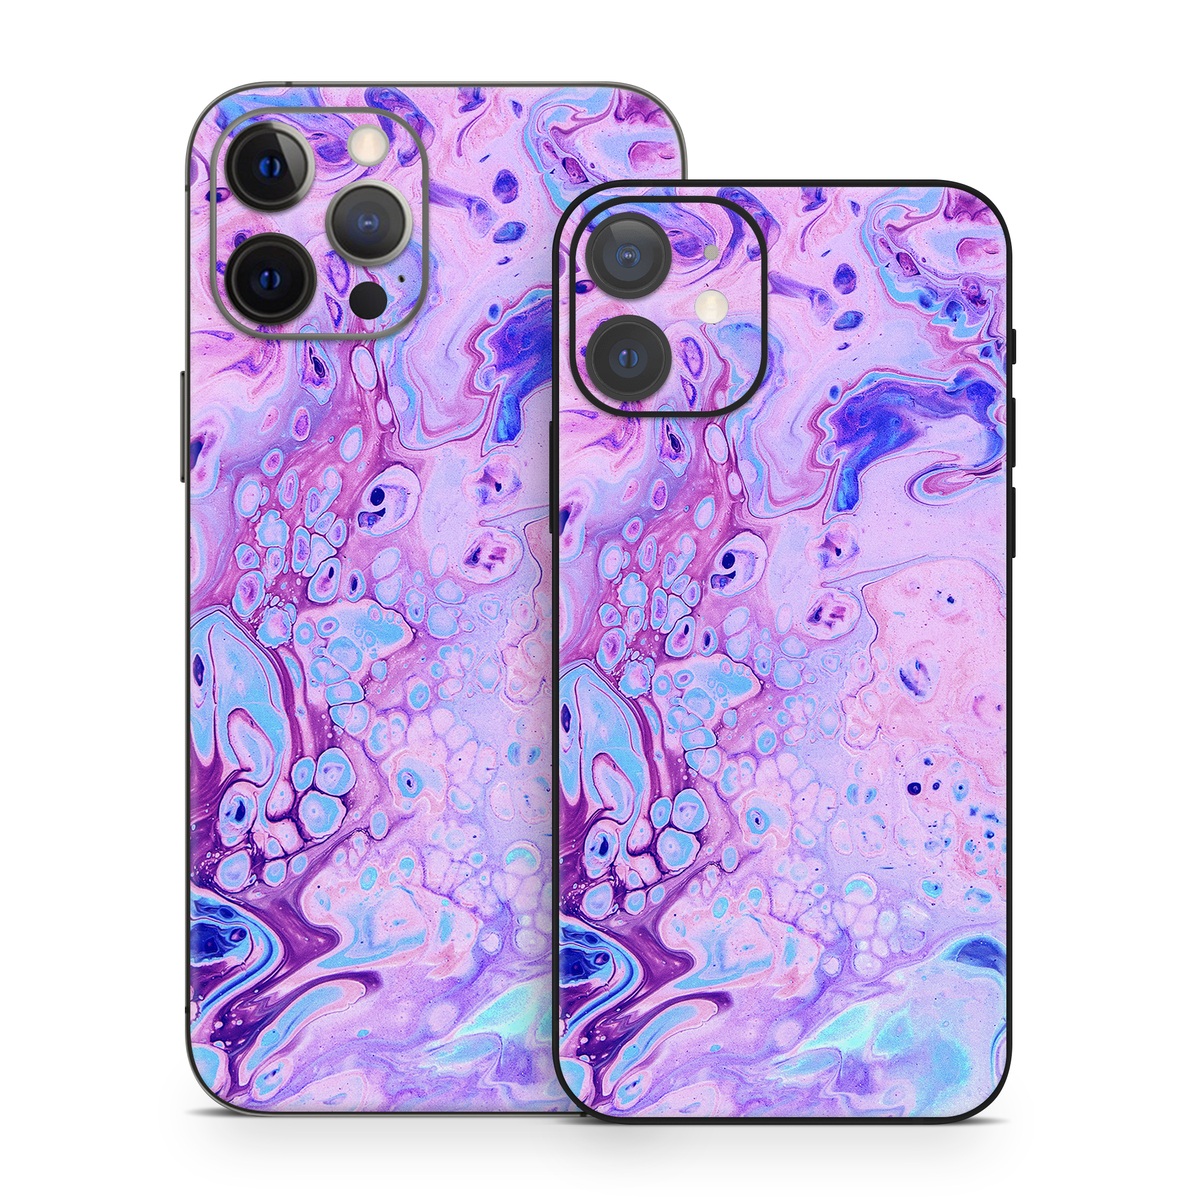 iPhone 12 Series Skin design of Purple, Violet, Lilac, Art, Pattern, Modern art, Painting, Visual arts, Acrylic paint, Magenta, with pink, purple, blue colors